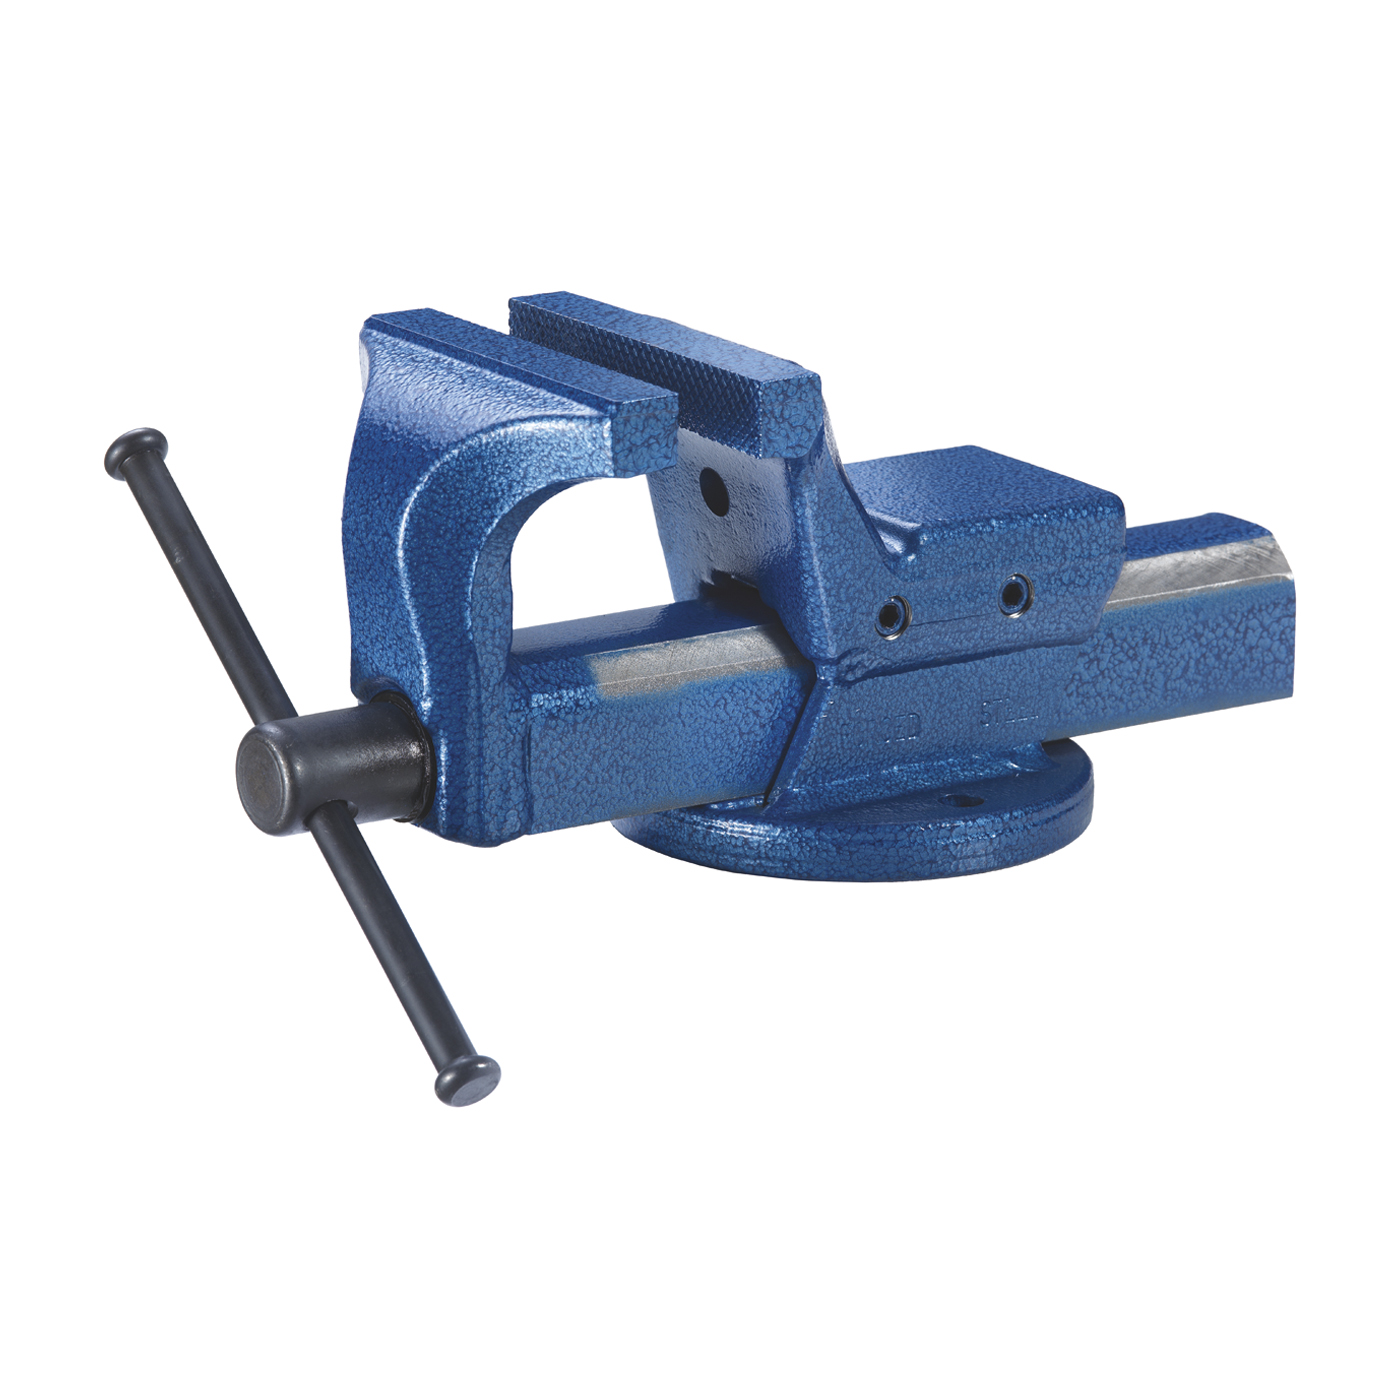 Parallel Vice, Jaw Width 150 mm - 1 piece